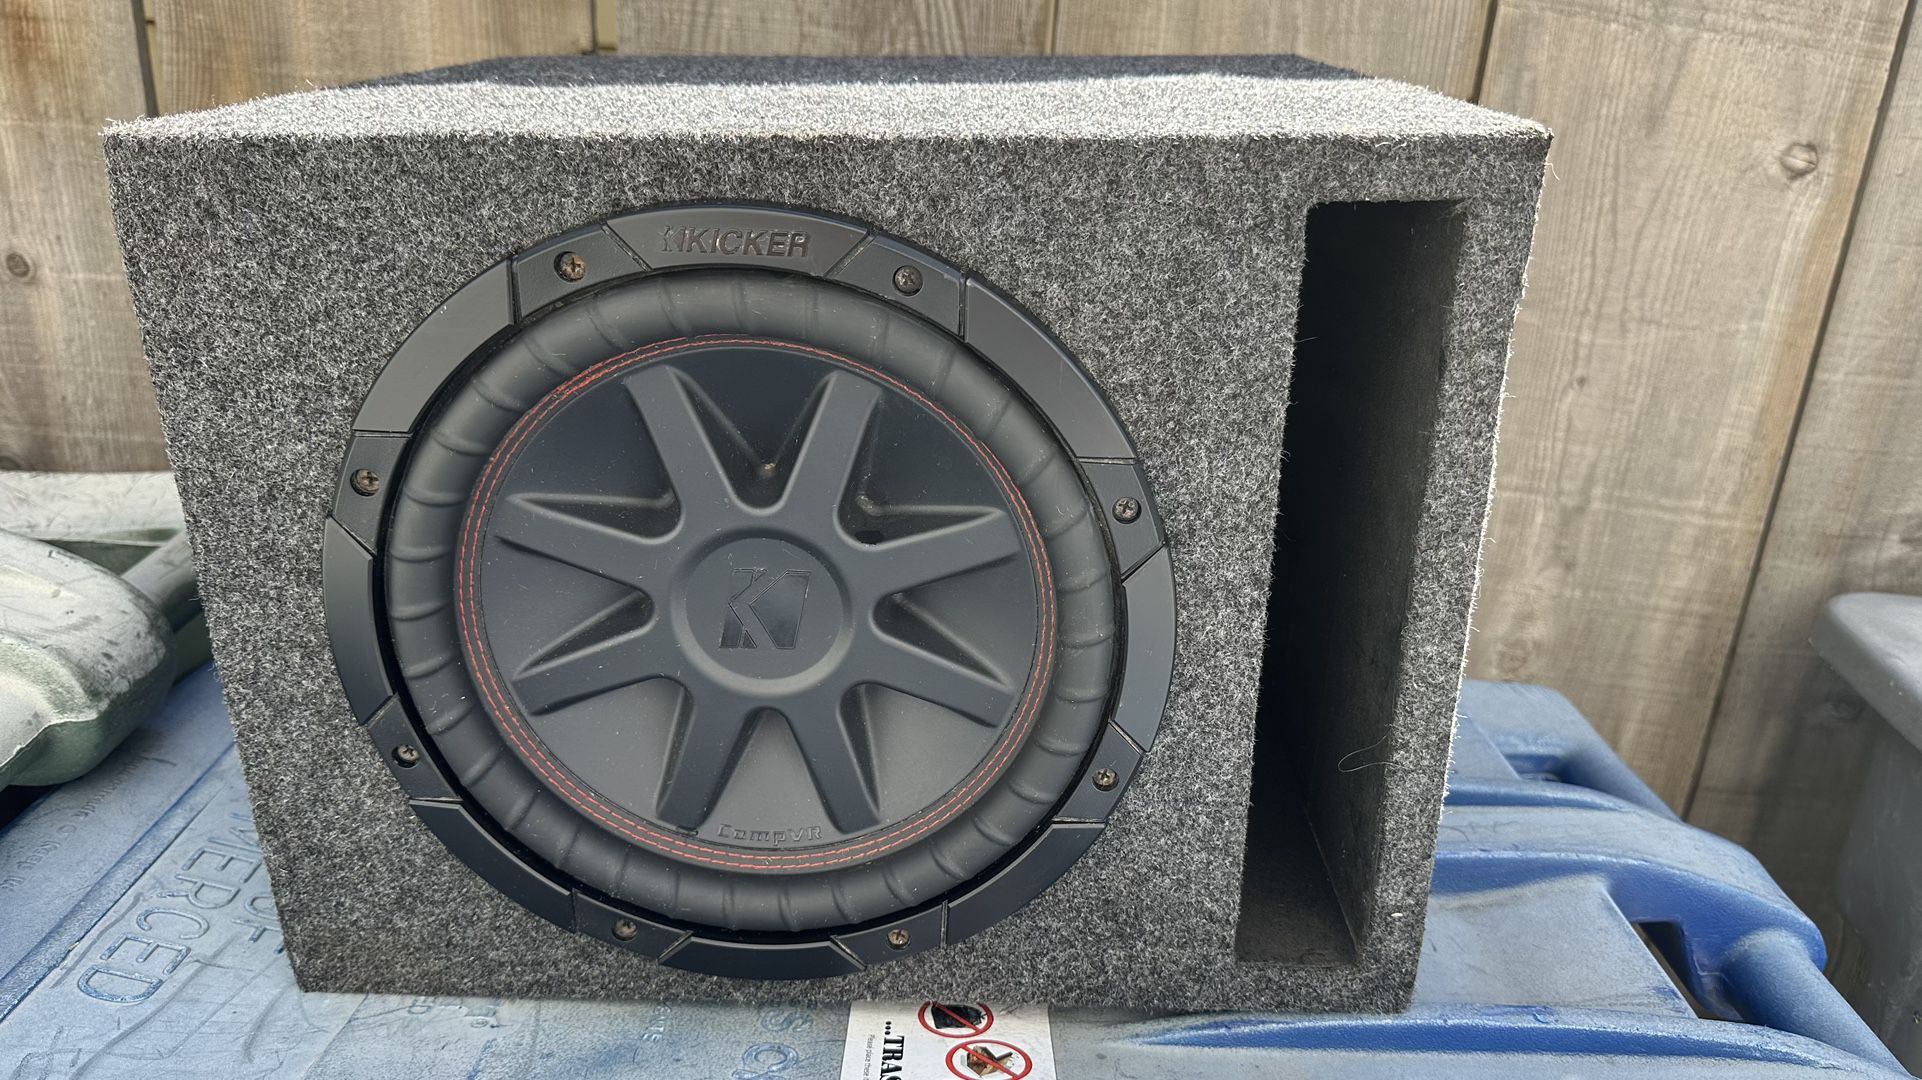 10 Inch Kicker Comp VR Dual Voice Coil 4 Ohm Car Stereo Sub Subwoofer In Ported Box Work Good Like New 